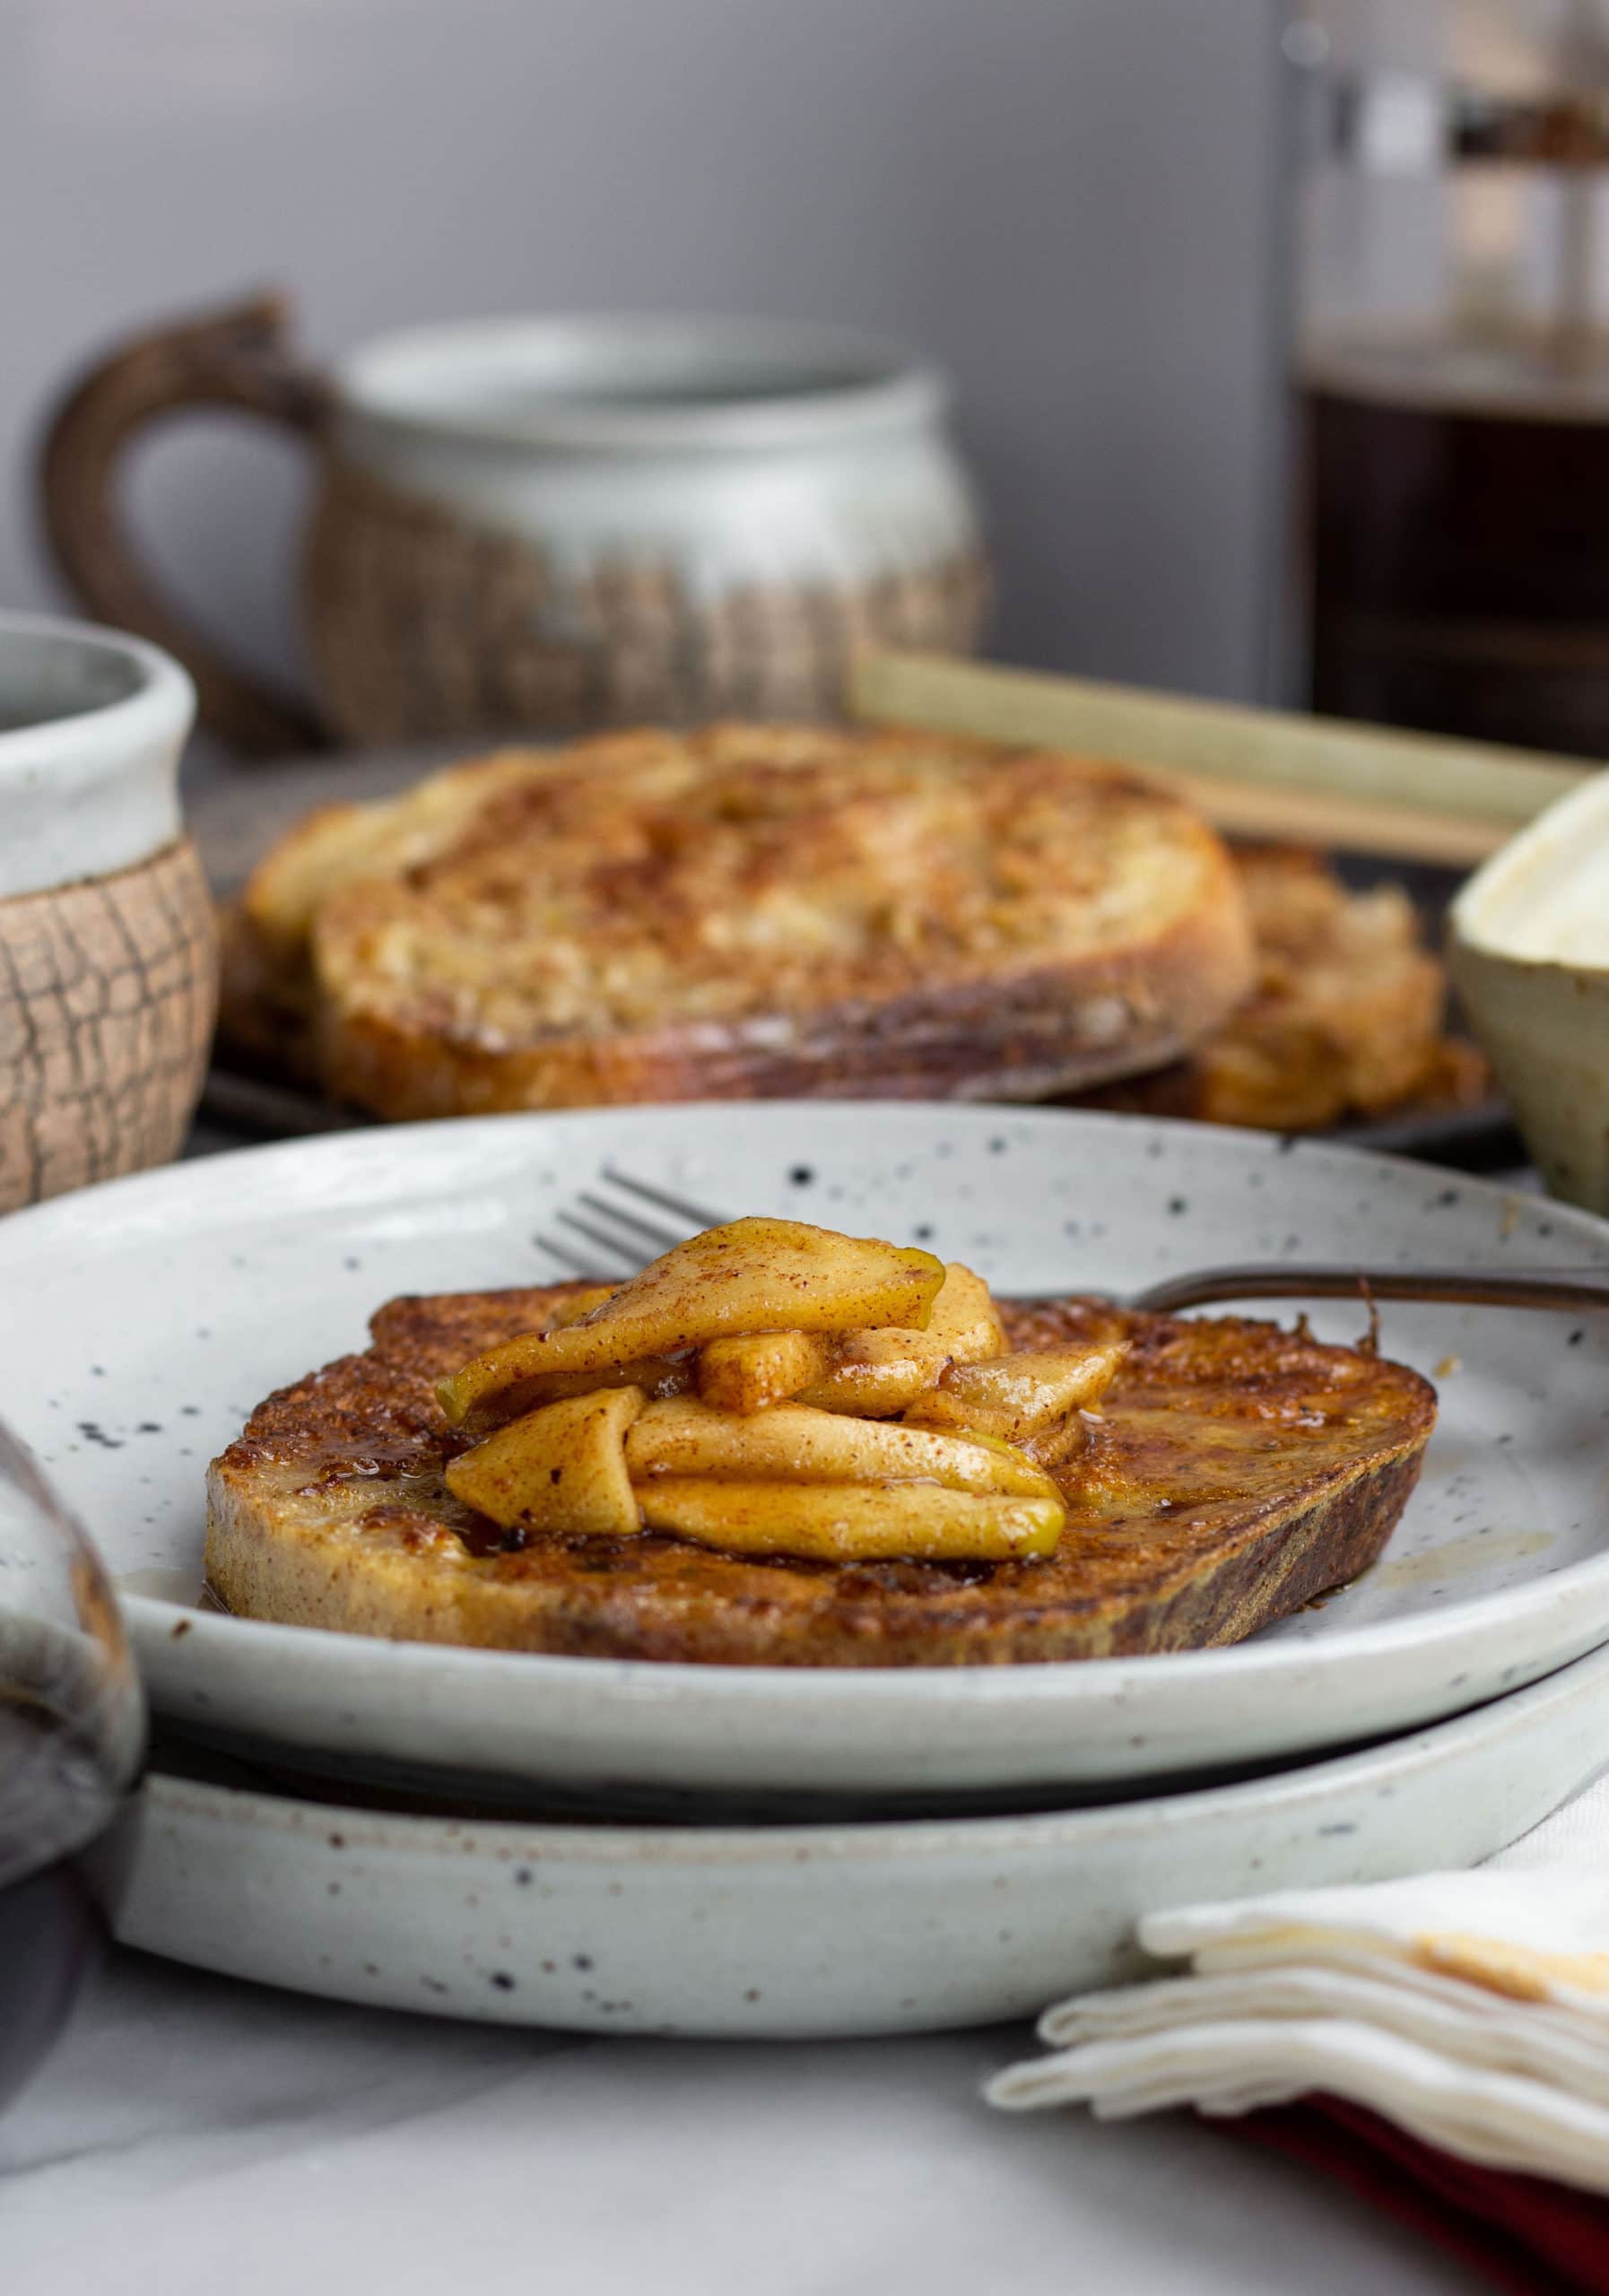 This Sourdough French Toast with Roasted Spiced Apples is the coziest brunch recipe.